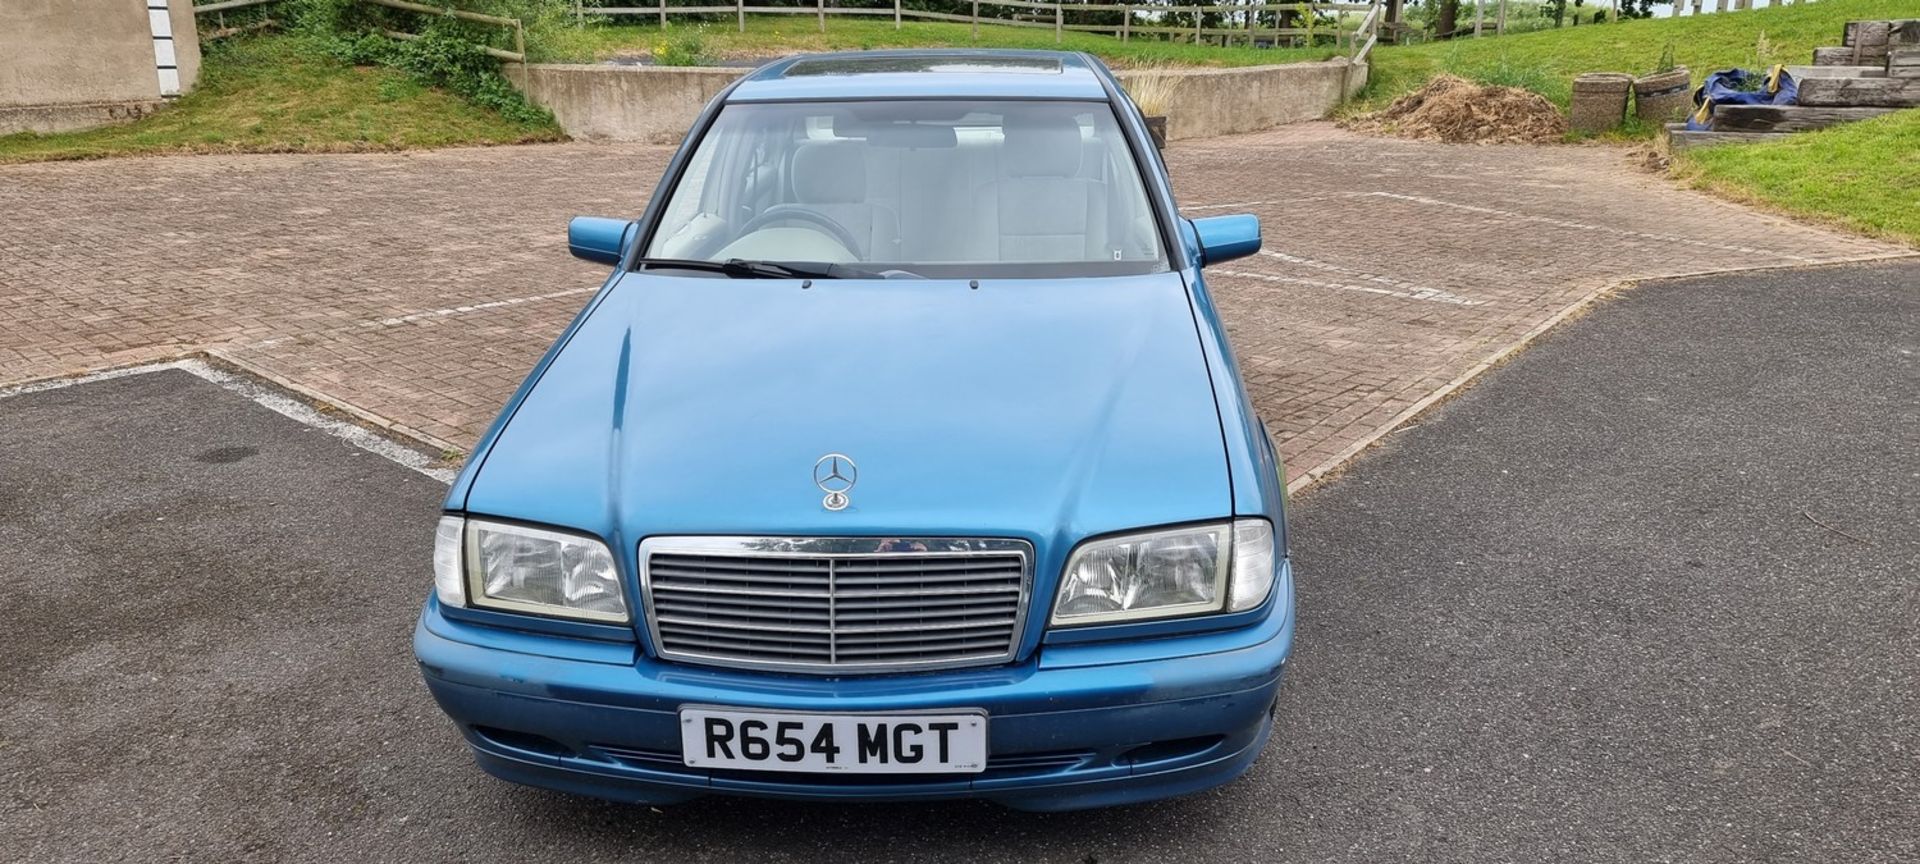 1997 Mercedes Benz W202 C180, Registration number R654 MGT. Chassis number . Engine number . In - Image 2 of 16